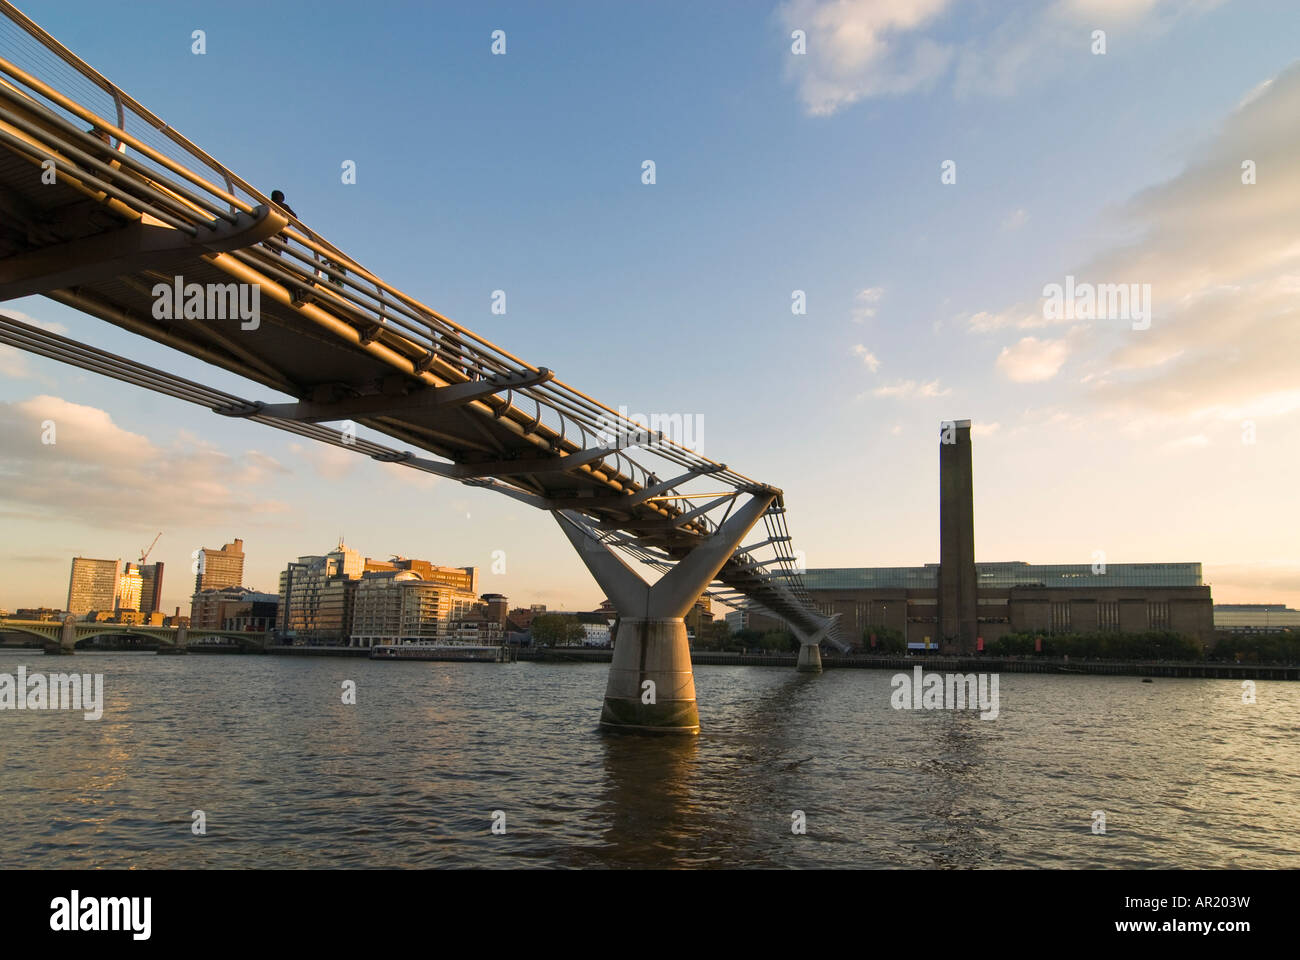 Horizontal wide angle of the Tate Modern museum and the Millennium Bridge crossing the river Thames at sunset. Stock Photo